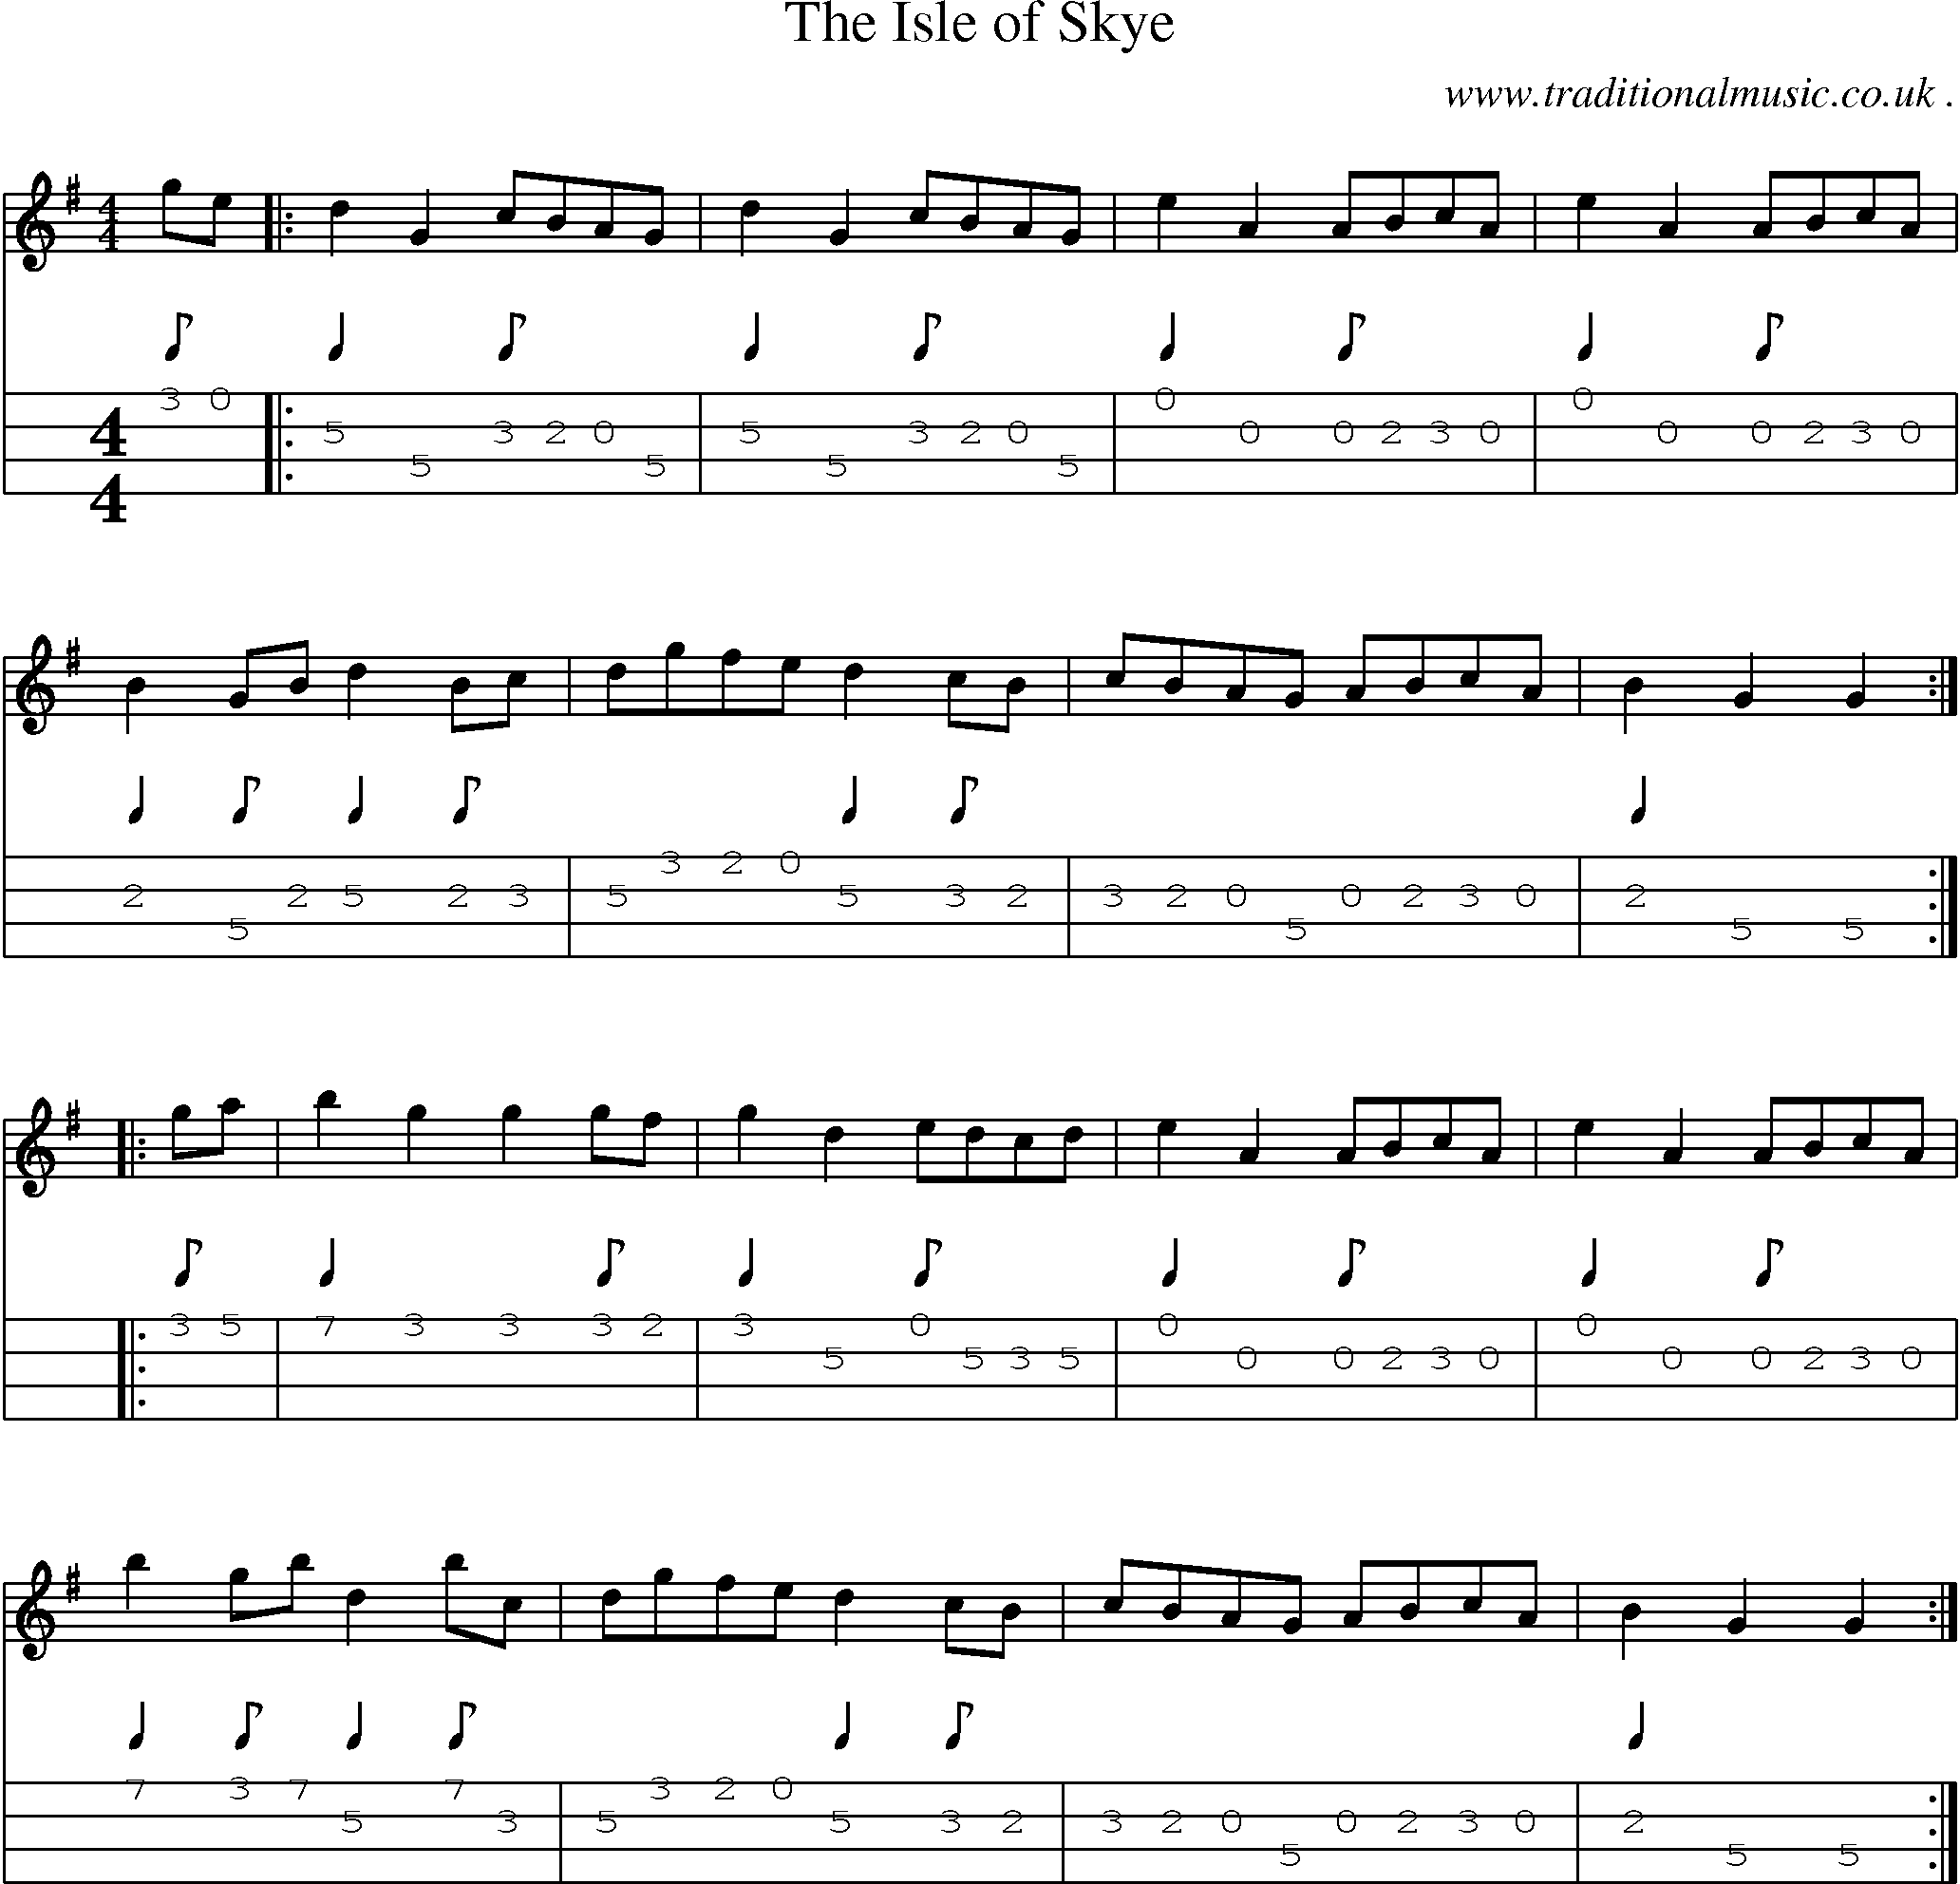 Sheet-music  score, Chords and Mandolin Tabs for The Isle Of Skye